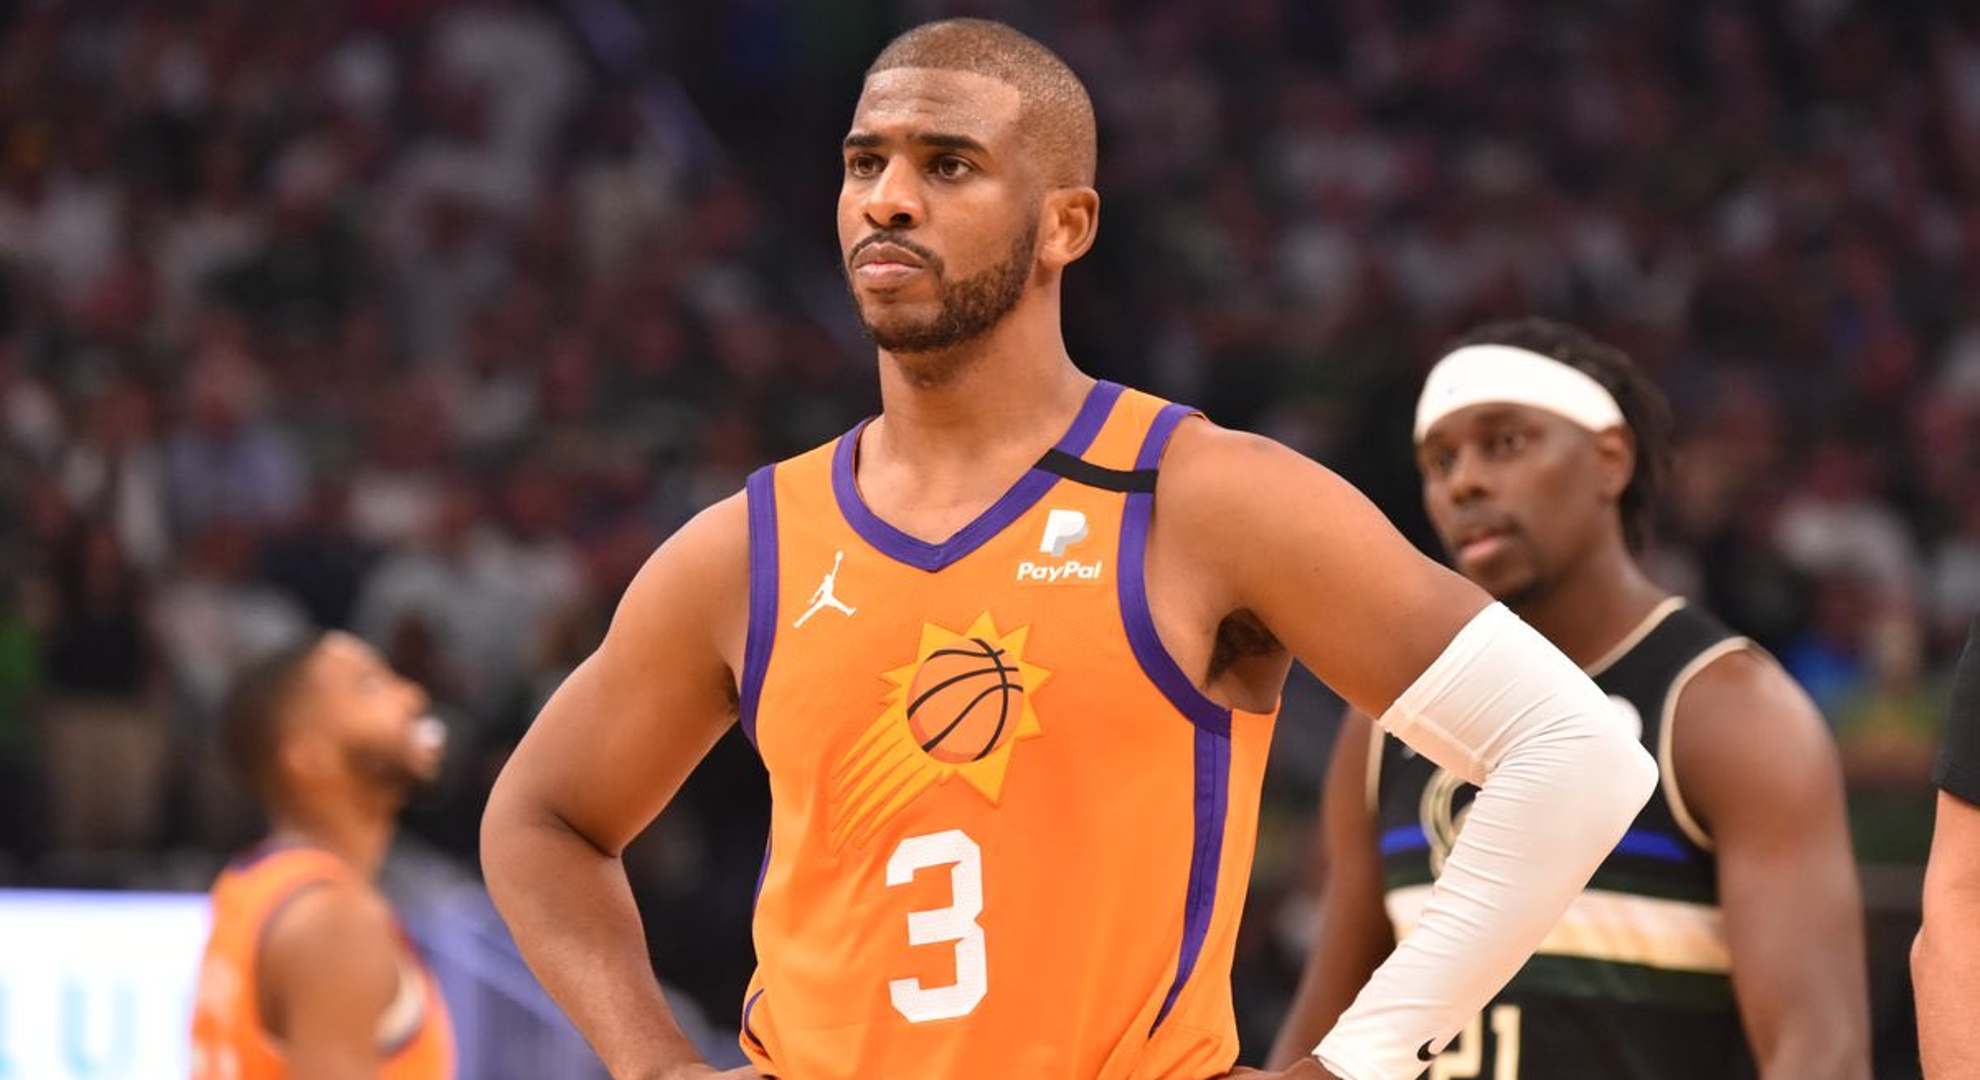 What is Chris Paul’s net worth, salary, contract status and brand